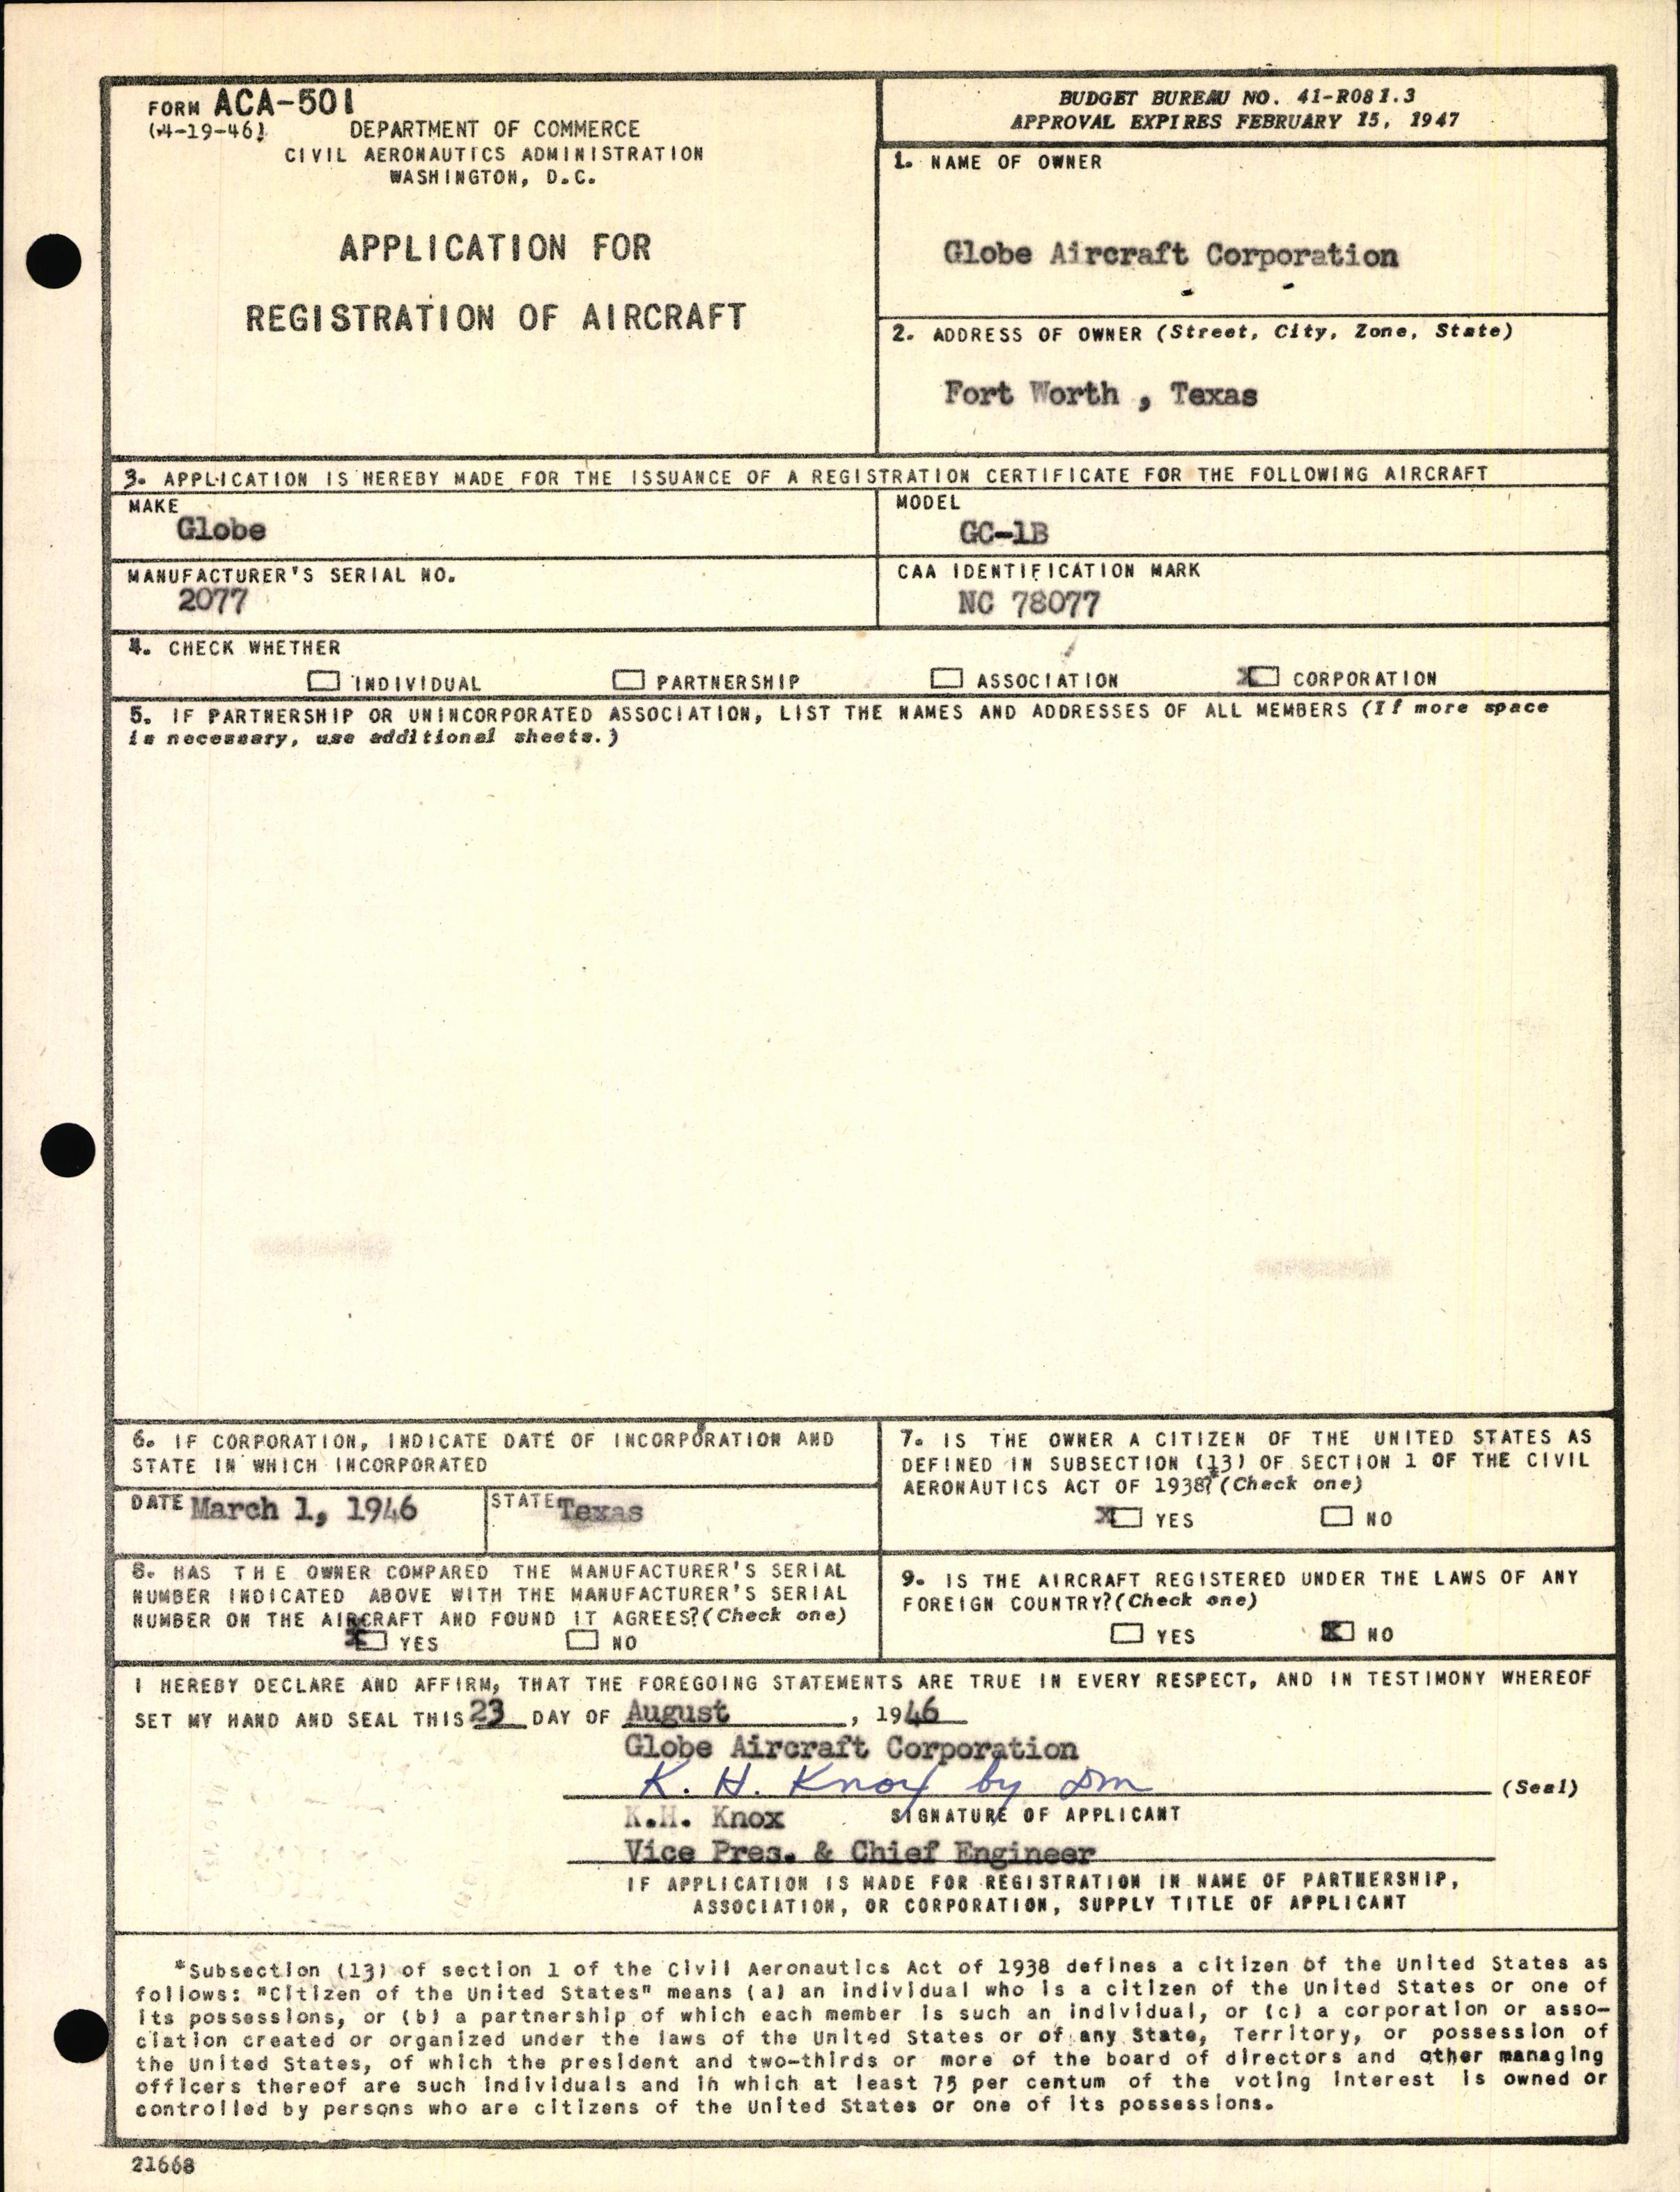 Sample page 3 from AirCorps Library document: Technical Information for Serial Number 2077